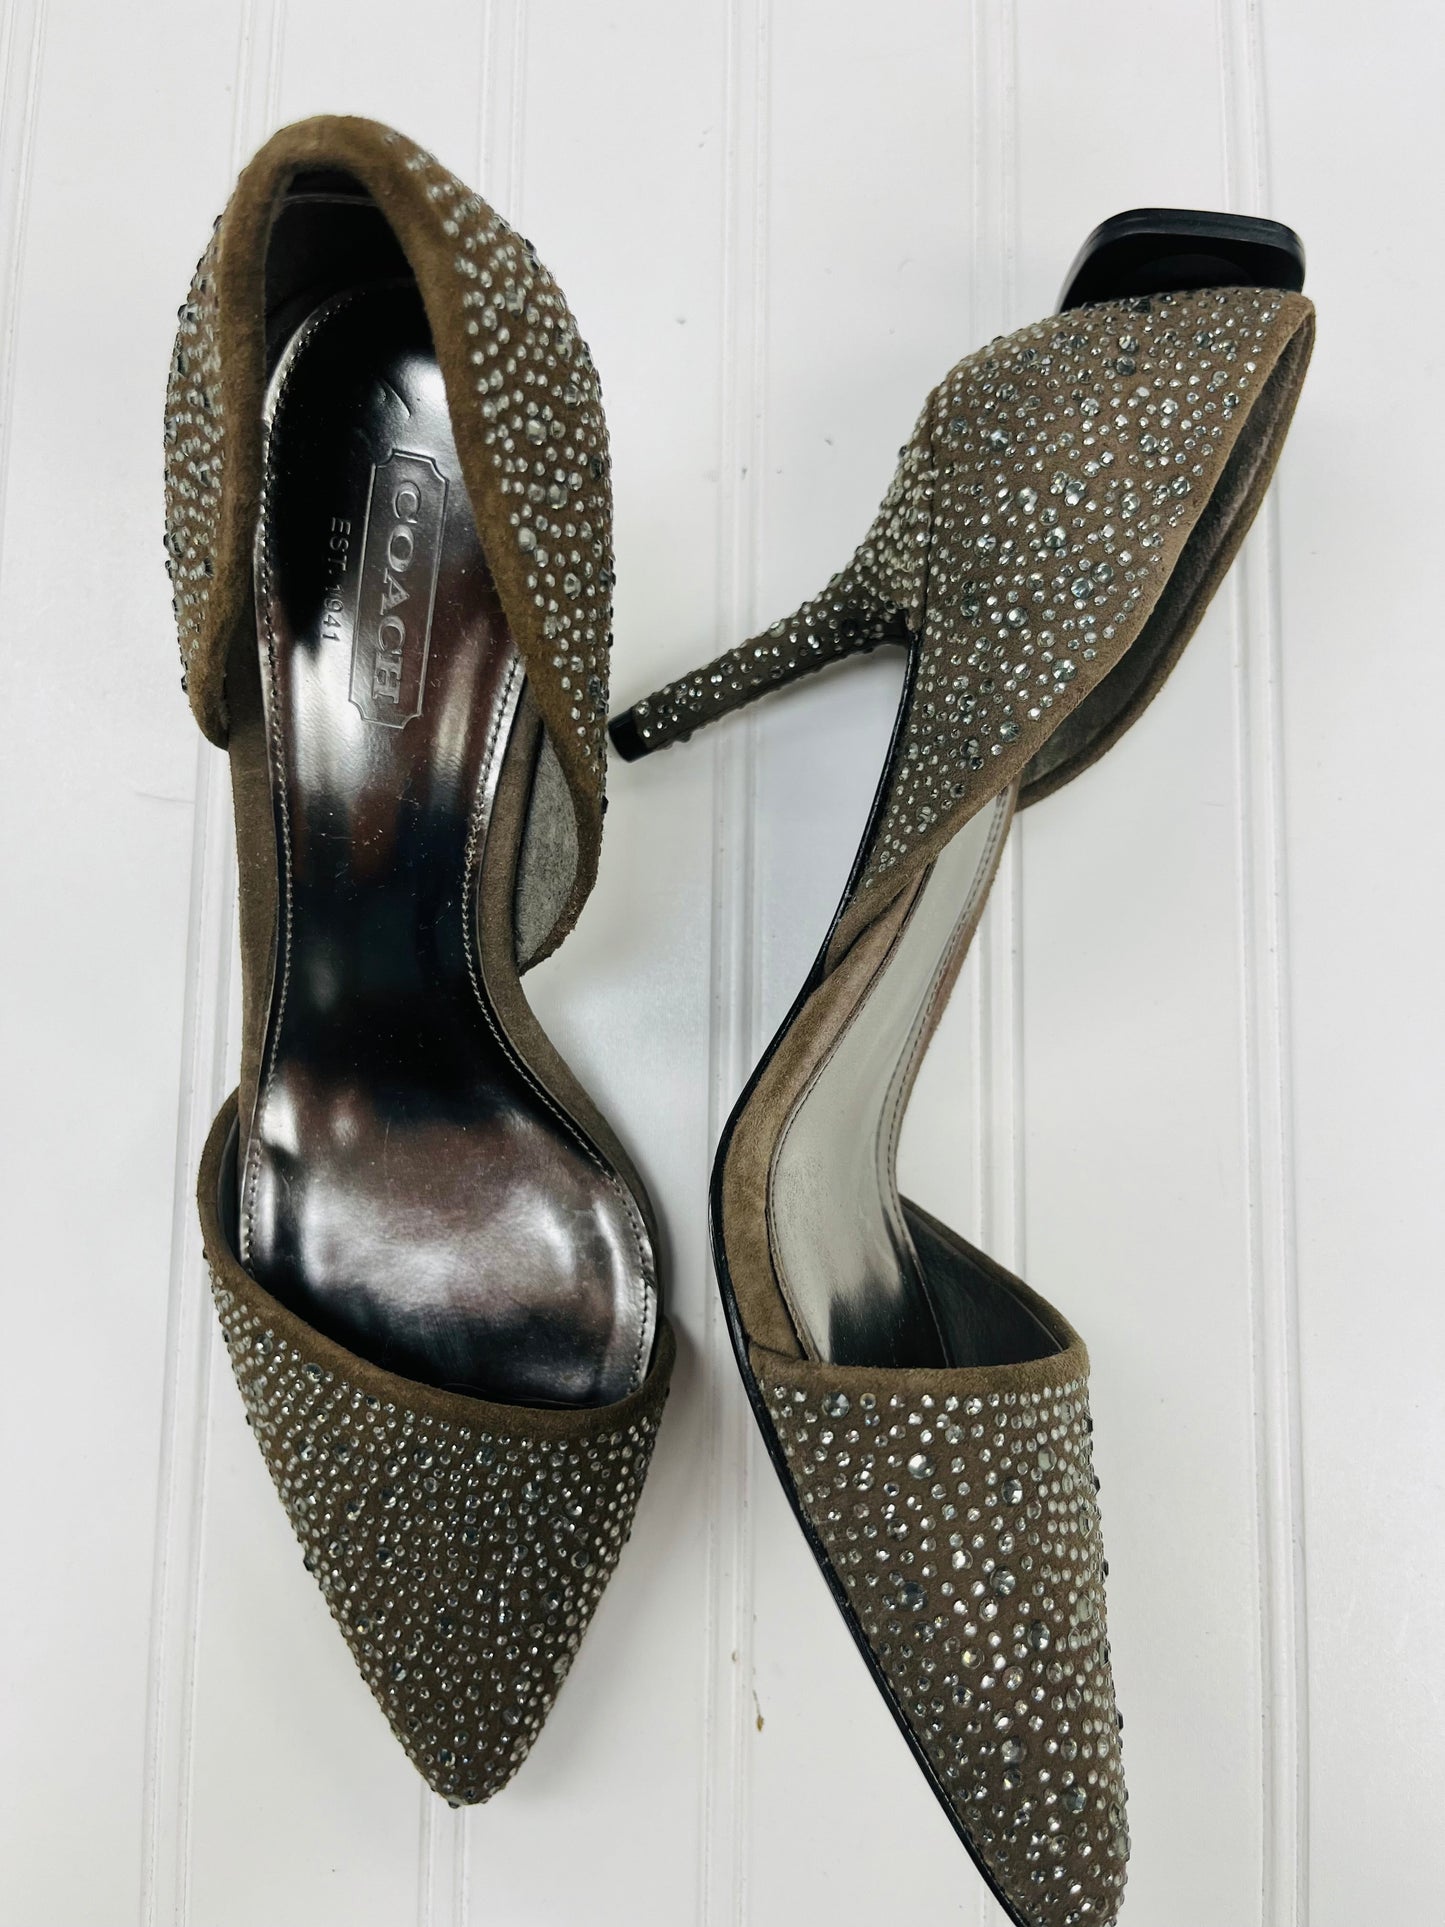 Shoes Heels Stiletto By Coach  Size: 7